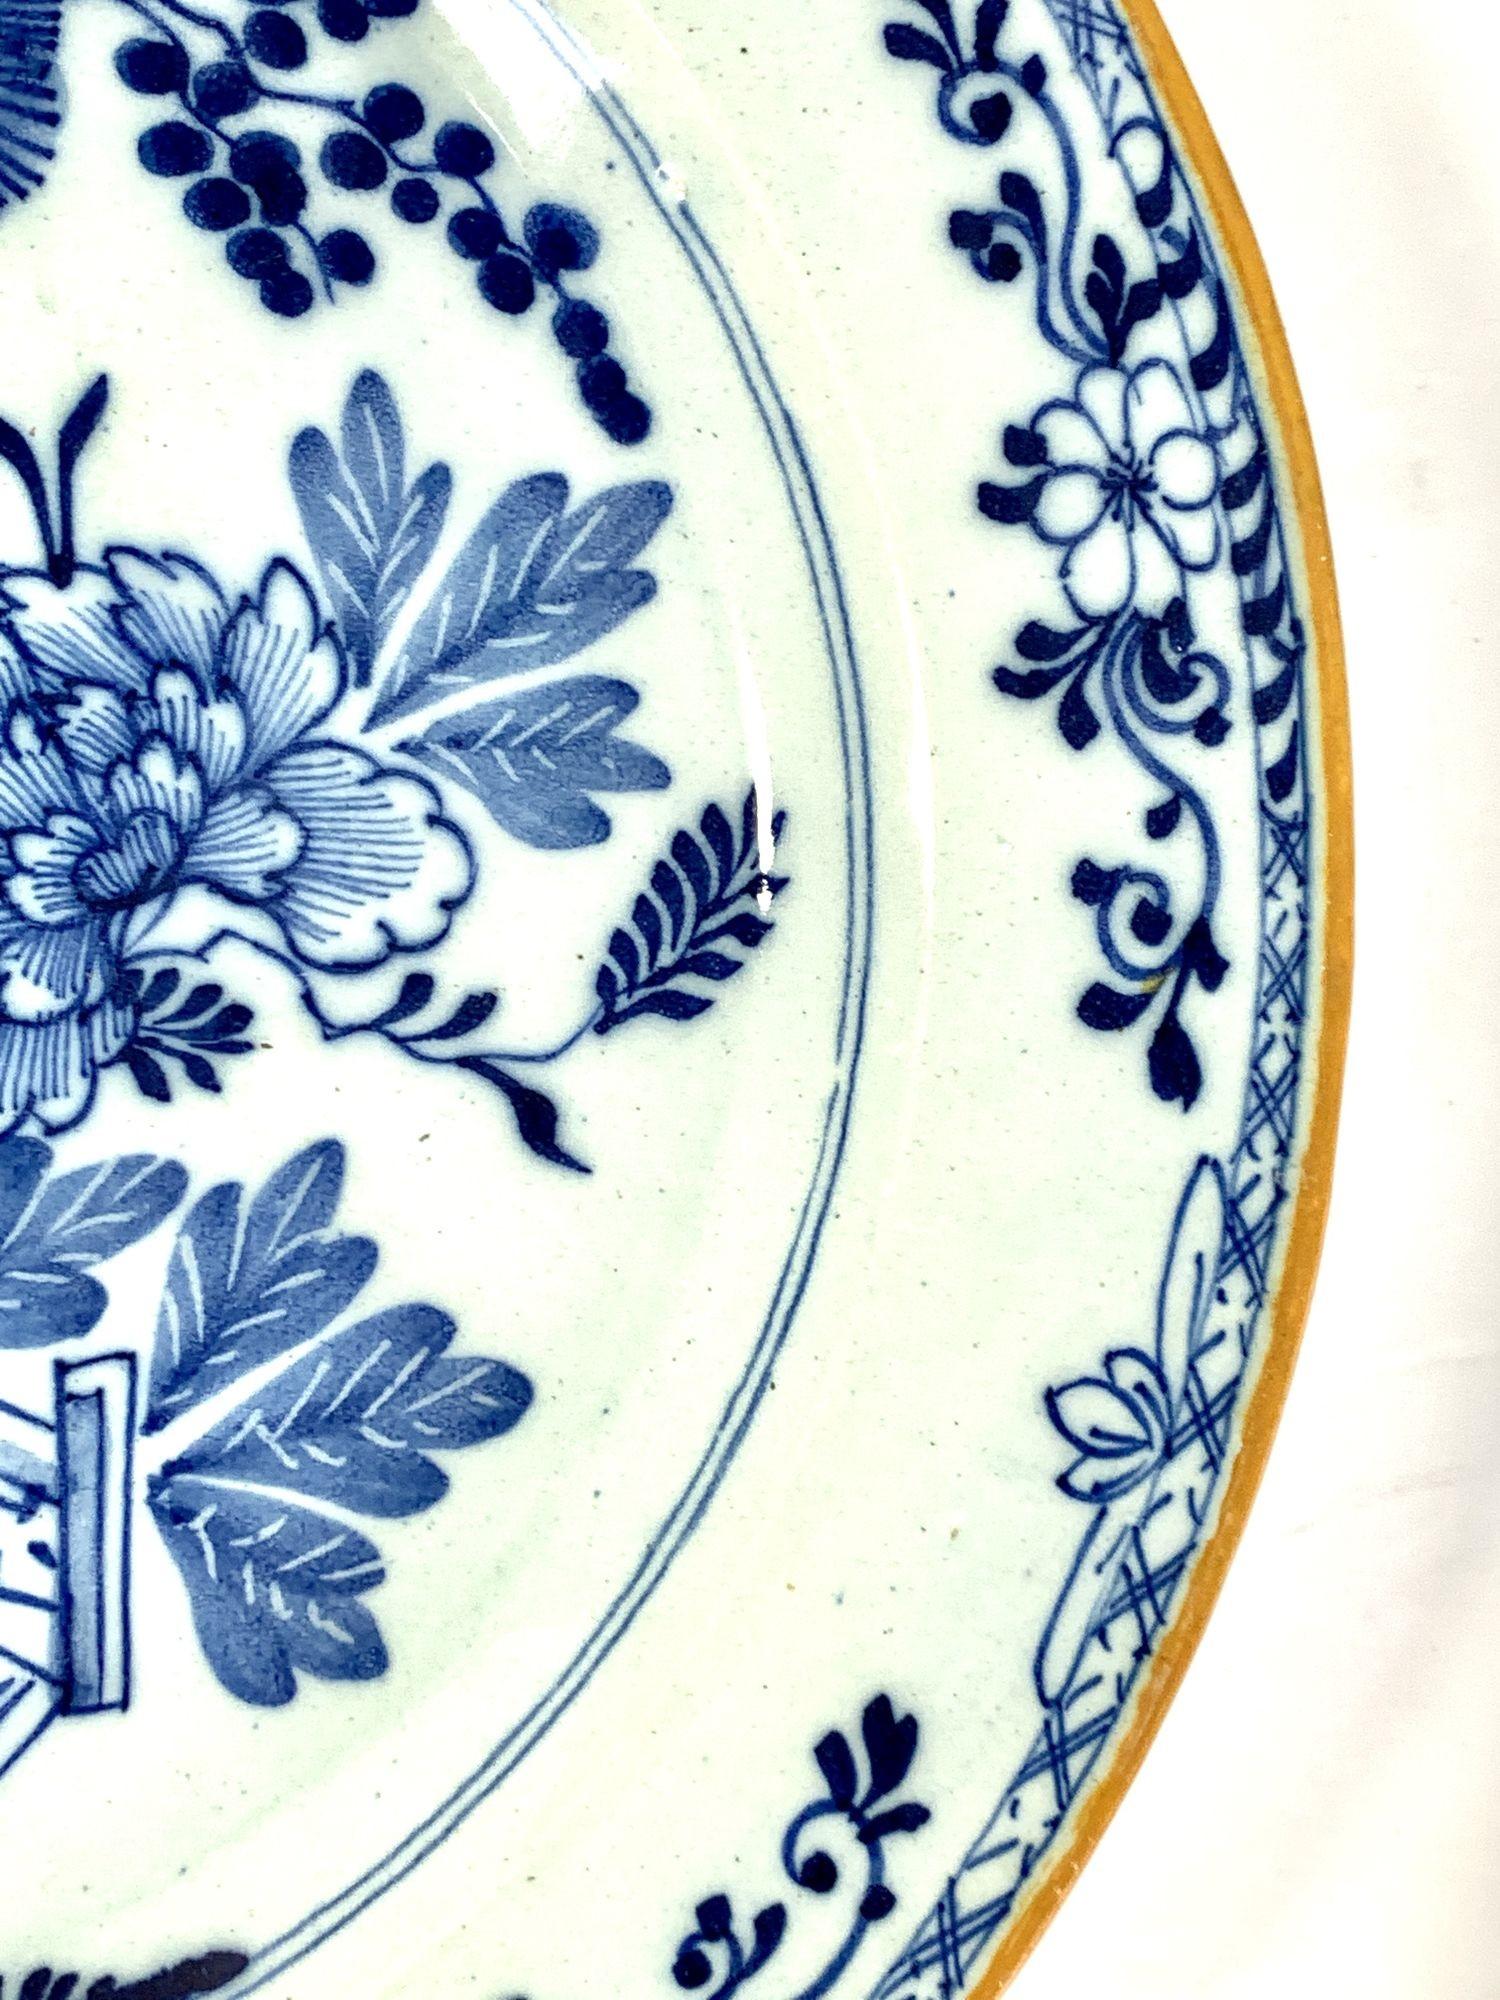 Blue and White Dutch Delft Charger Netherlands Circa 1780 with Mark of 